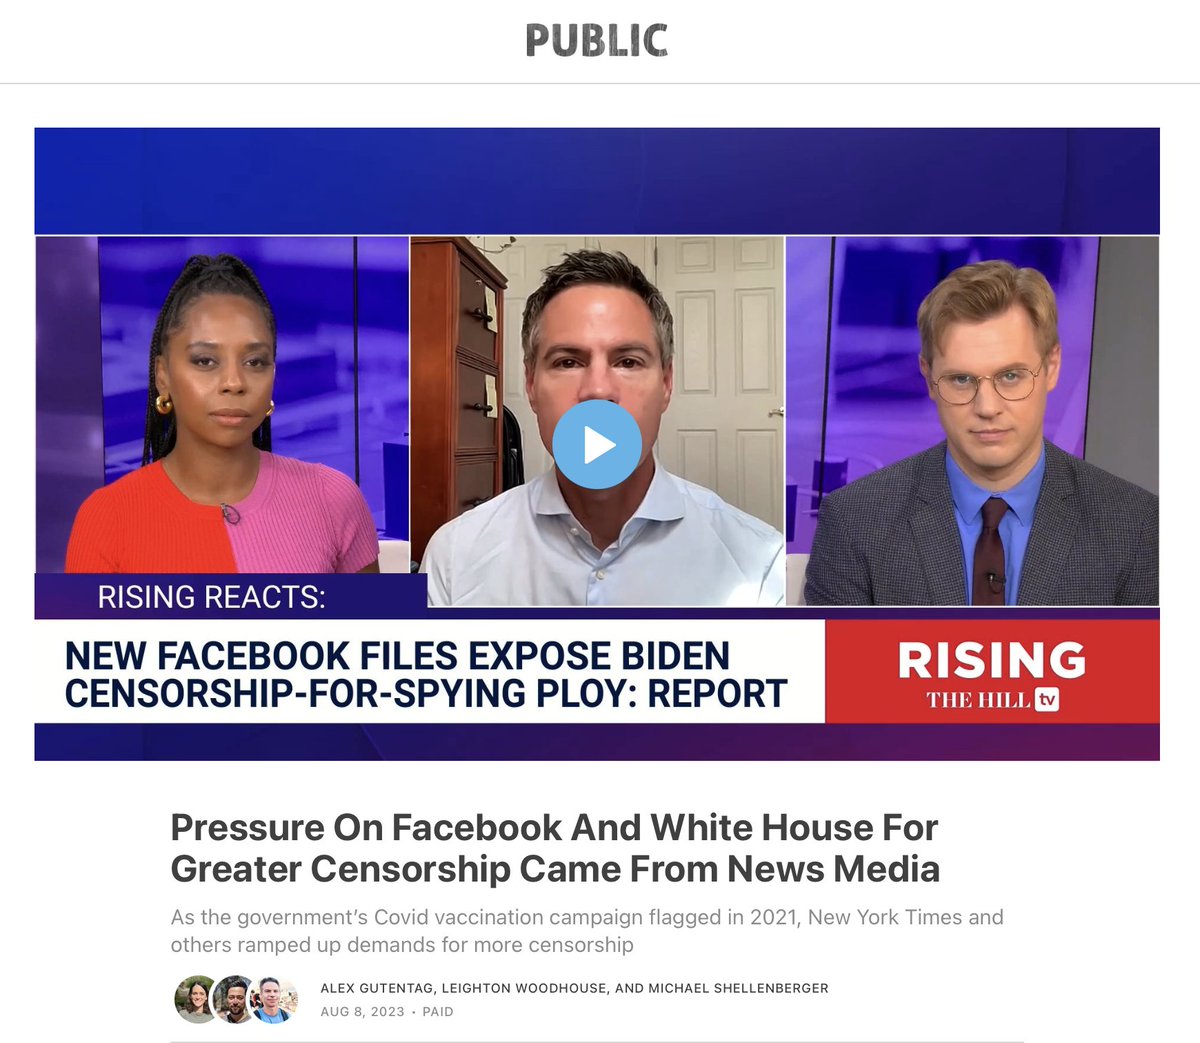 The White House demanded more Covid censorship despite overwhelming evidence — discussed internally by Facebook executives — that censorship increases 'vaccine hesitancy.' Why, then, did the White House demand it? Because the White House was under pressure from the news media.